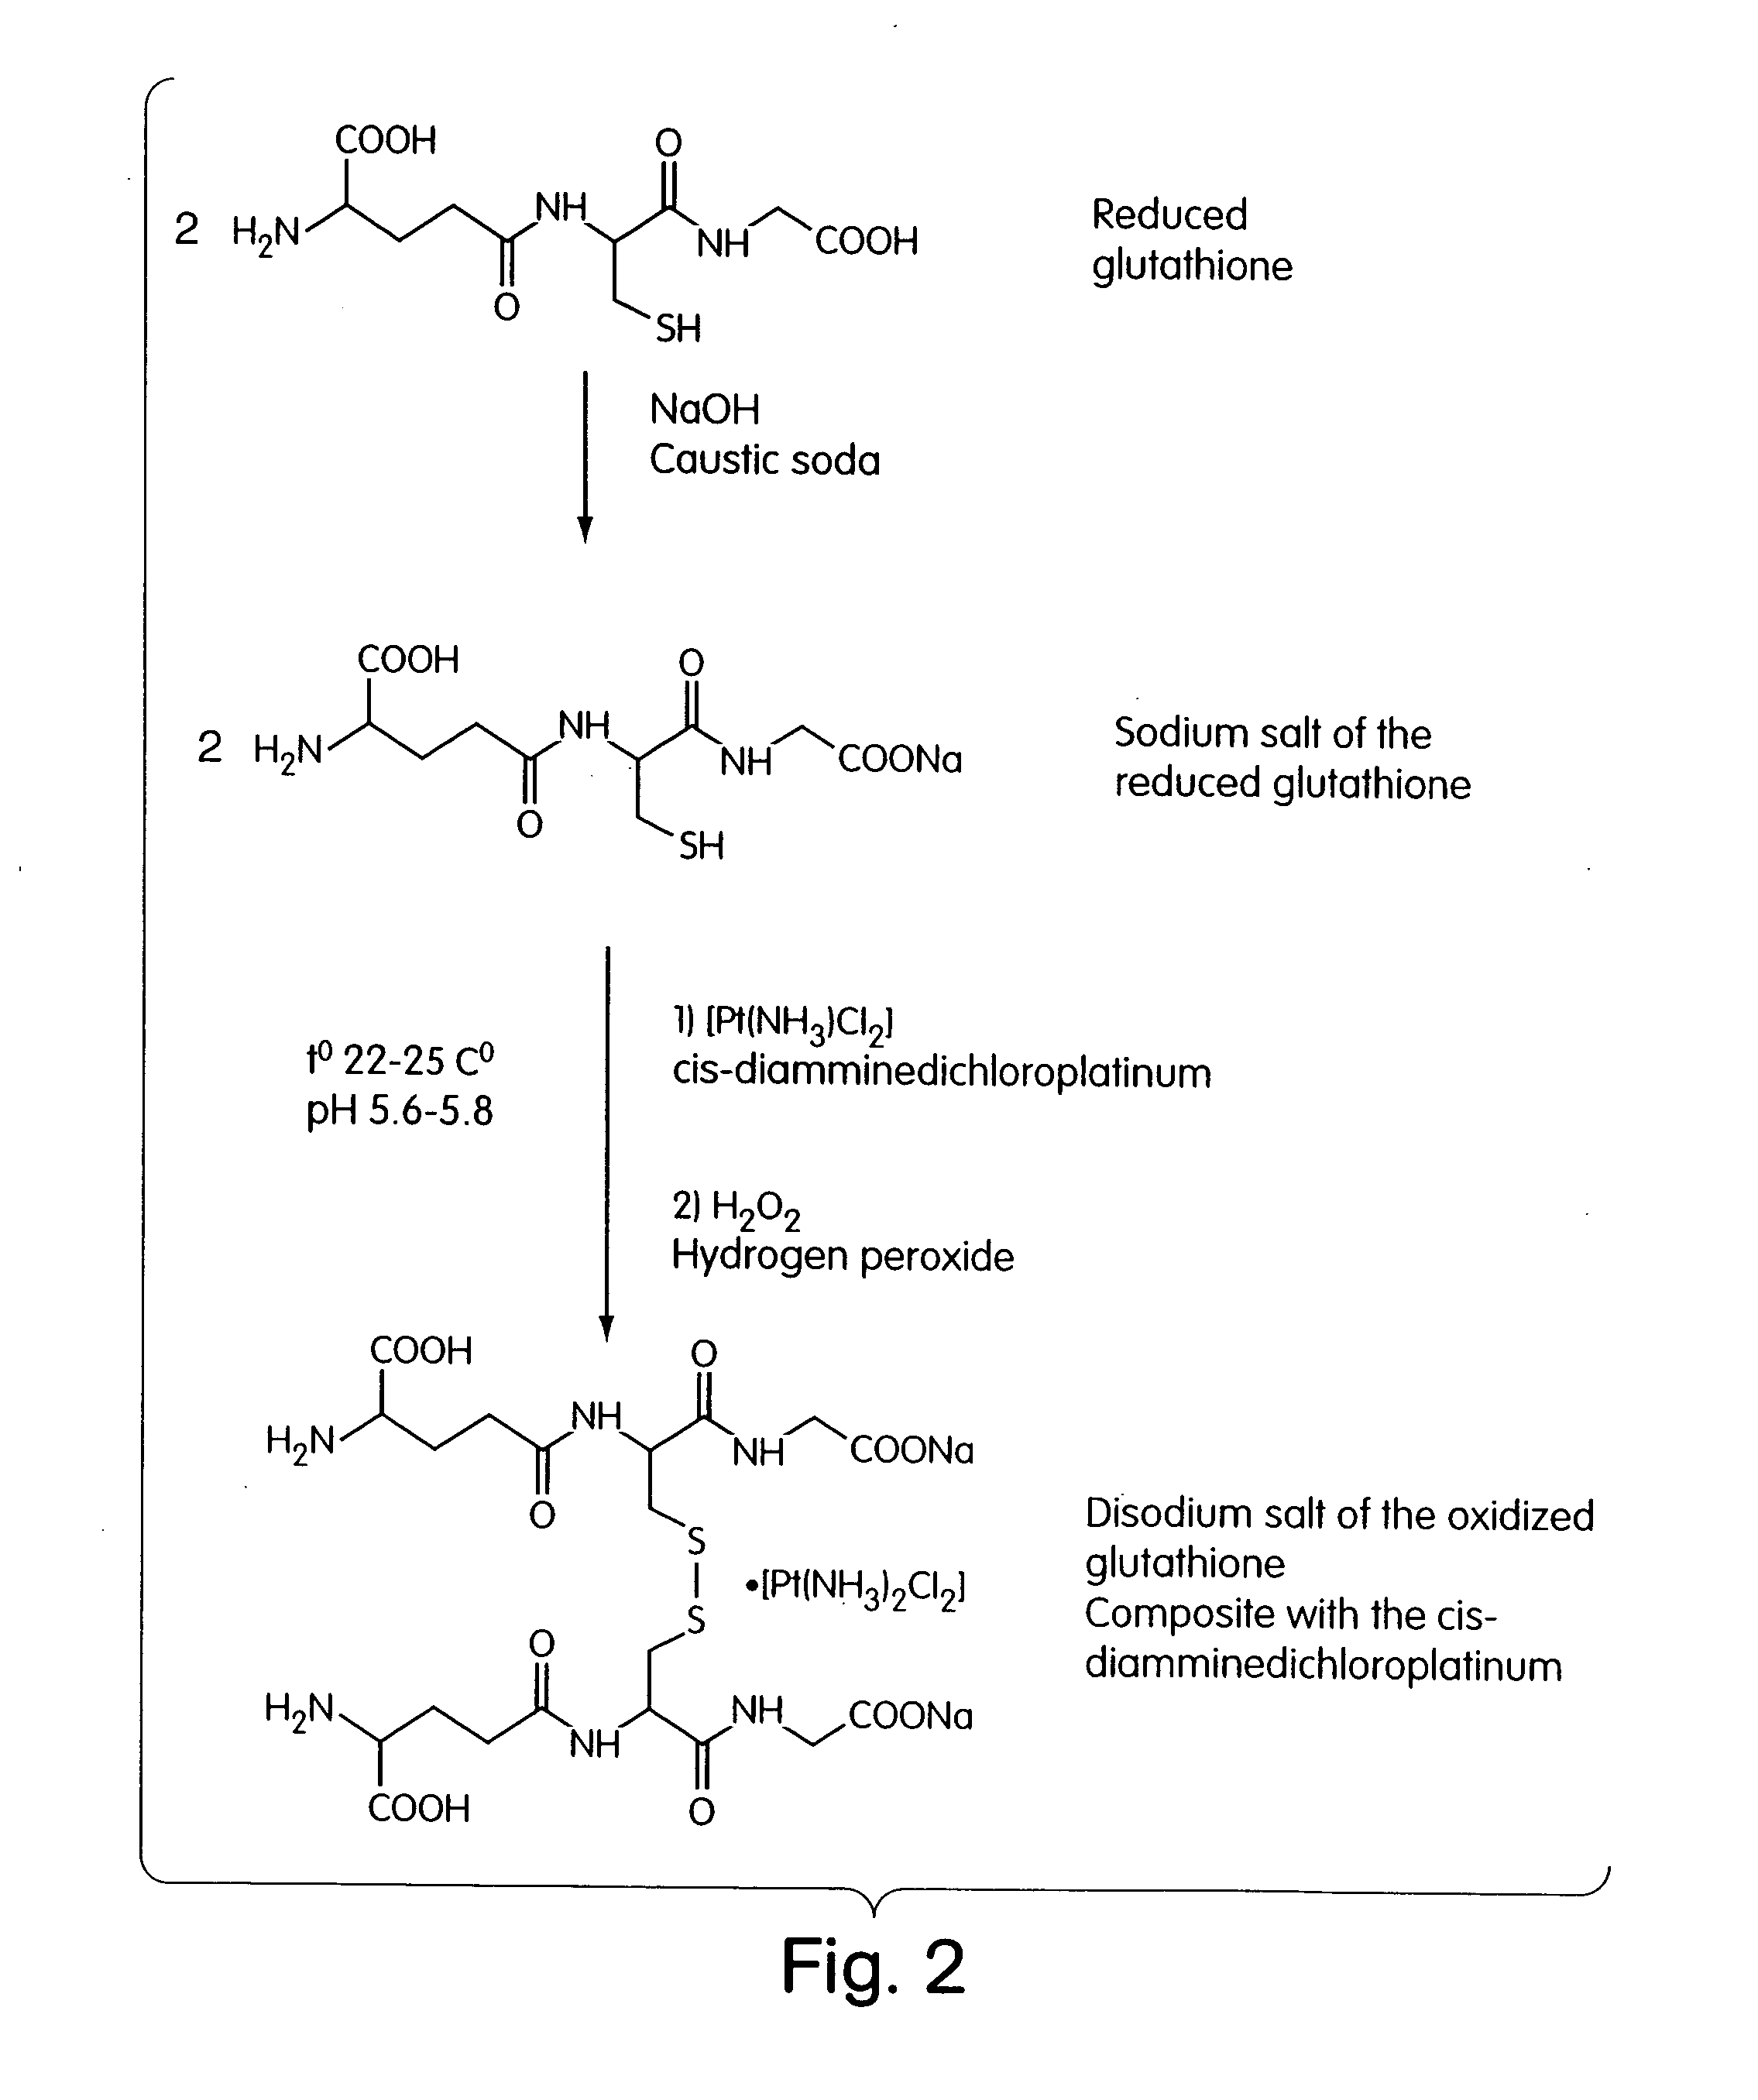 Methods for production of the oxidized glutathione composite with CIS-diamminedichloroplatinum and pharmaceutical compositions based thereof regulating metabolism, proliferation, differentiation and apoptotic mechanisms for normal and transformed cells